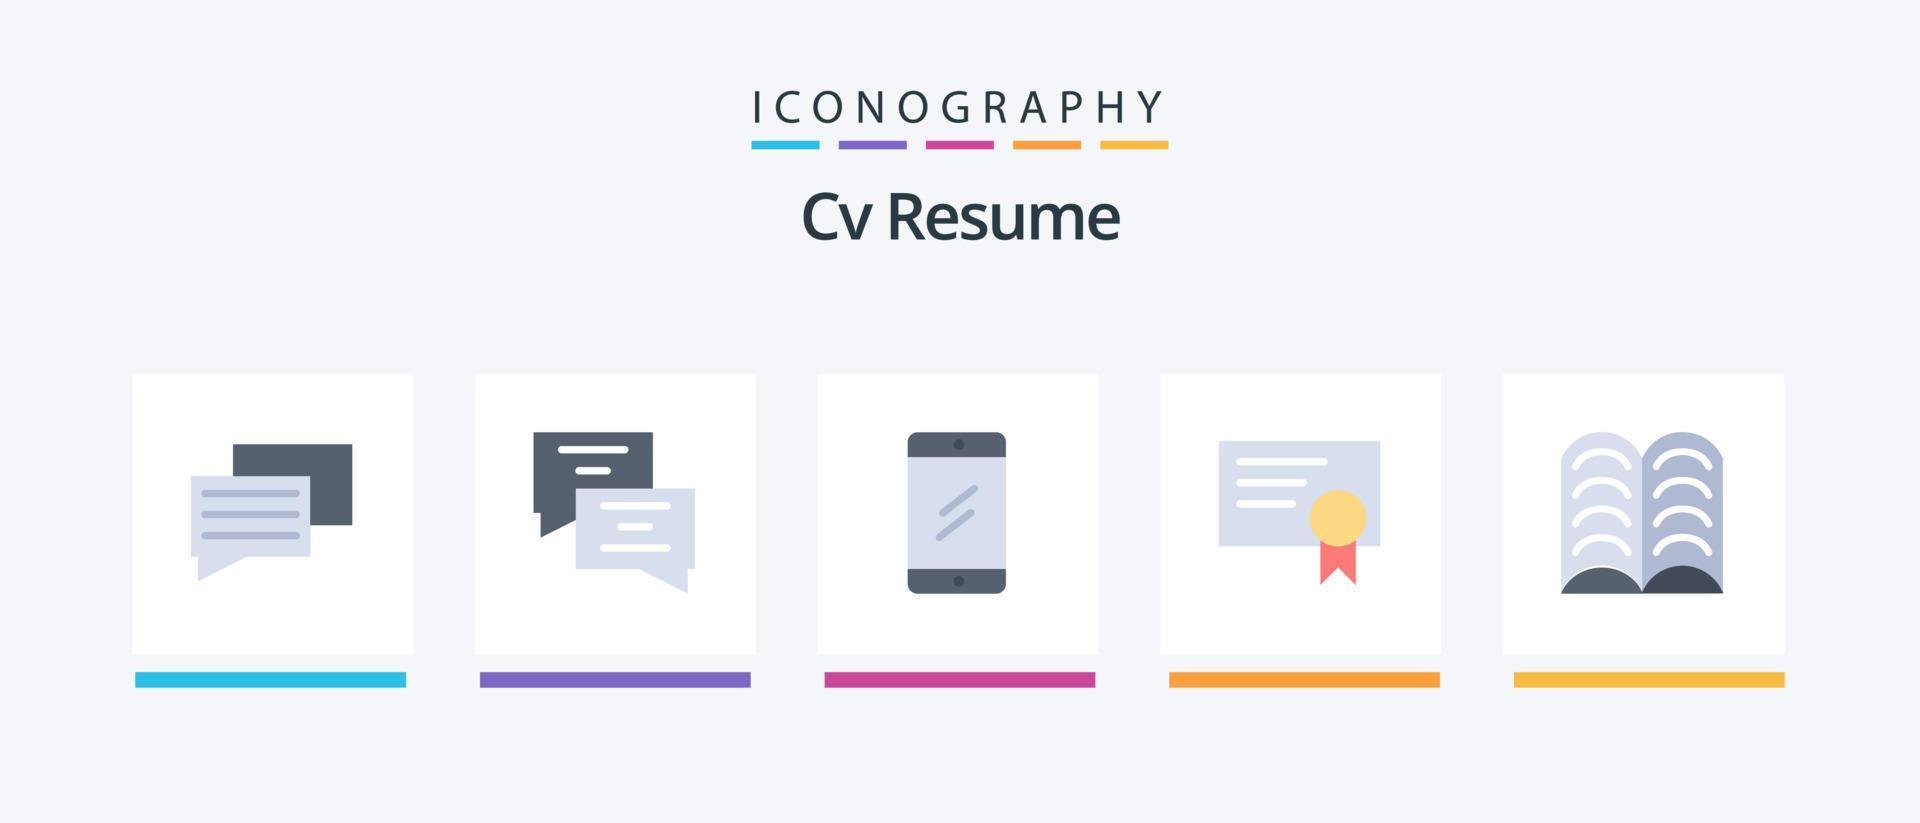 Cv Resume Flat 5 Icon Pack Including . diploma. learn. Creative Icons Design vector